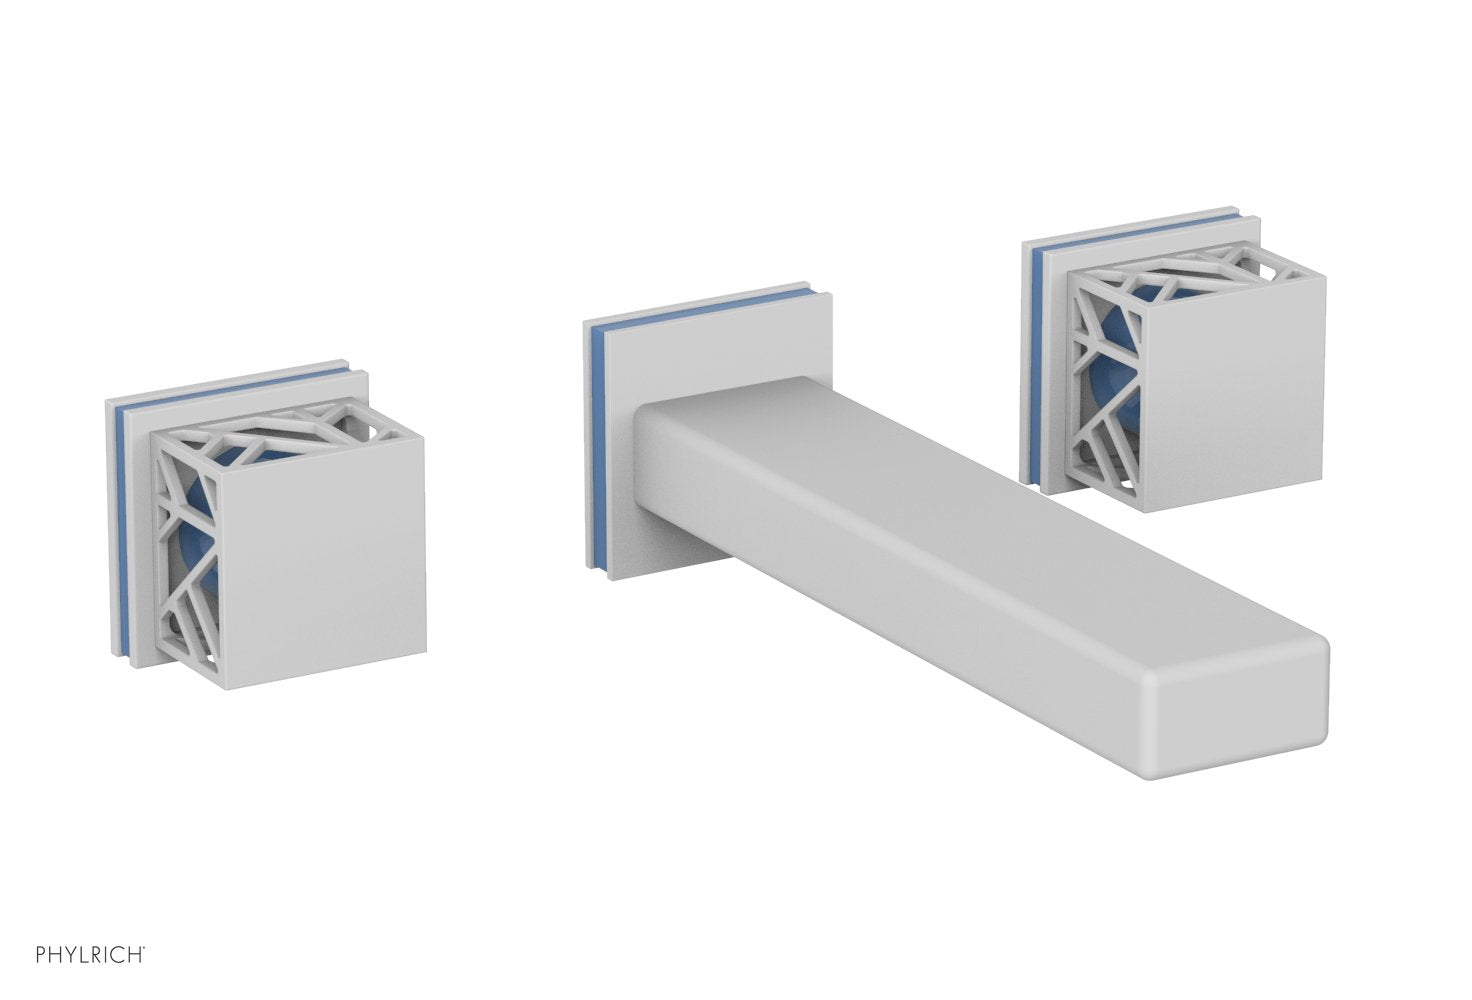 Phylrich JOLIE Wall Tub Set - Square Handles with "Light Blue" Accents